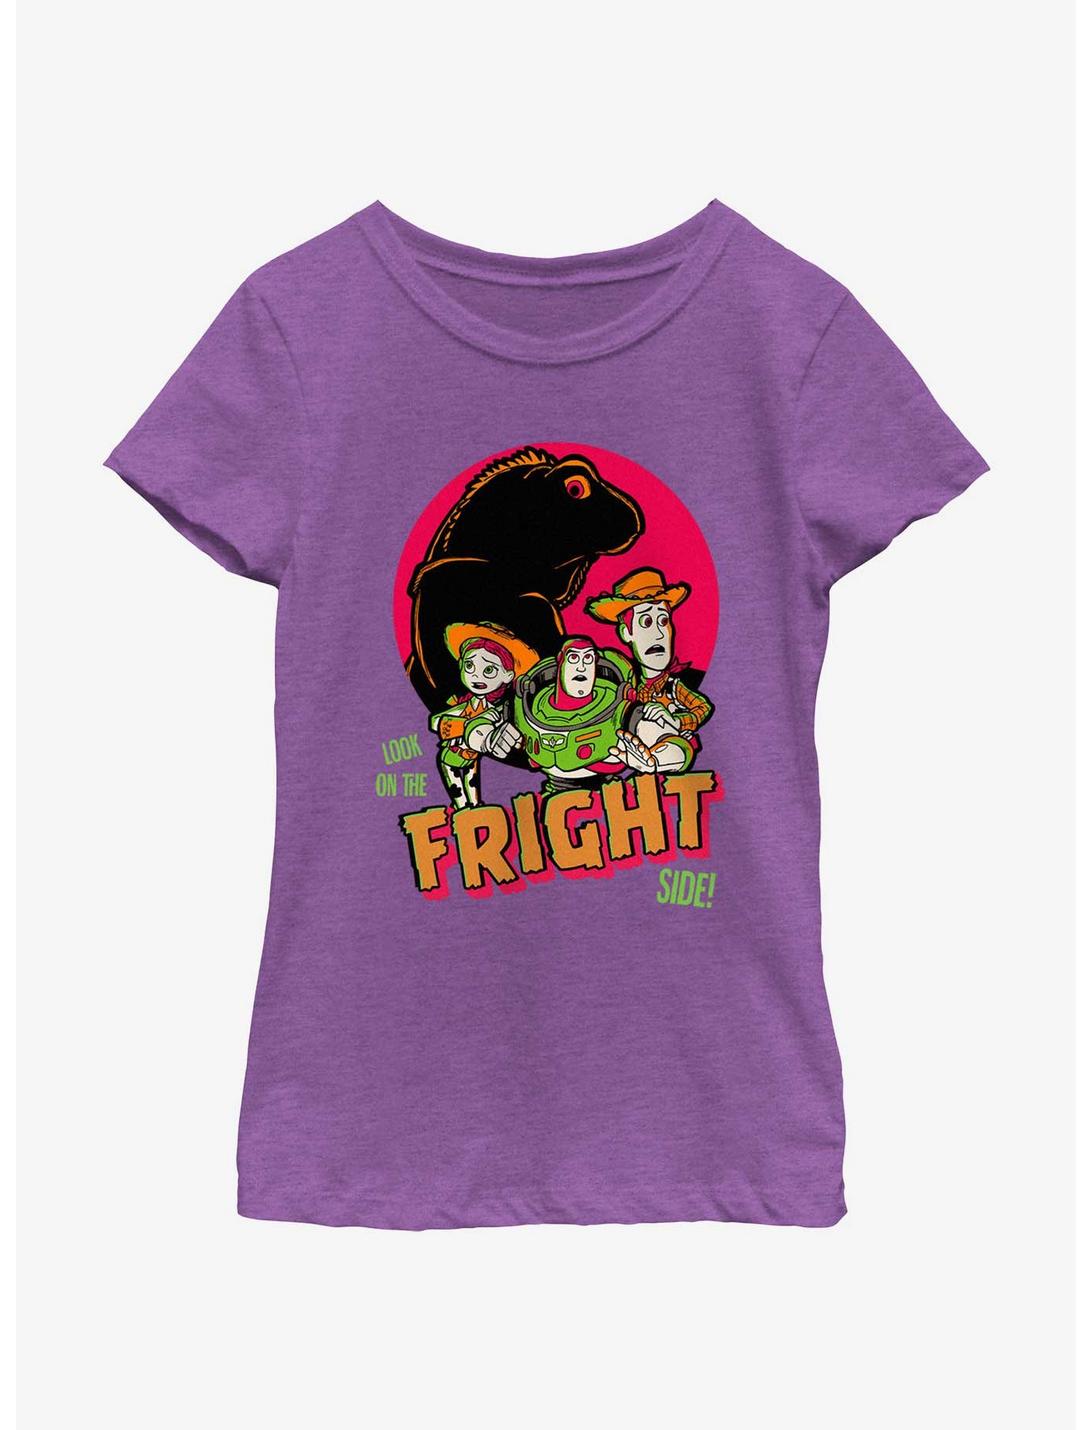 Disney100 Halloween Look On The Fright Side Youth Girl's T-Shirt, PURPLE BERRY, hi-res